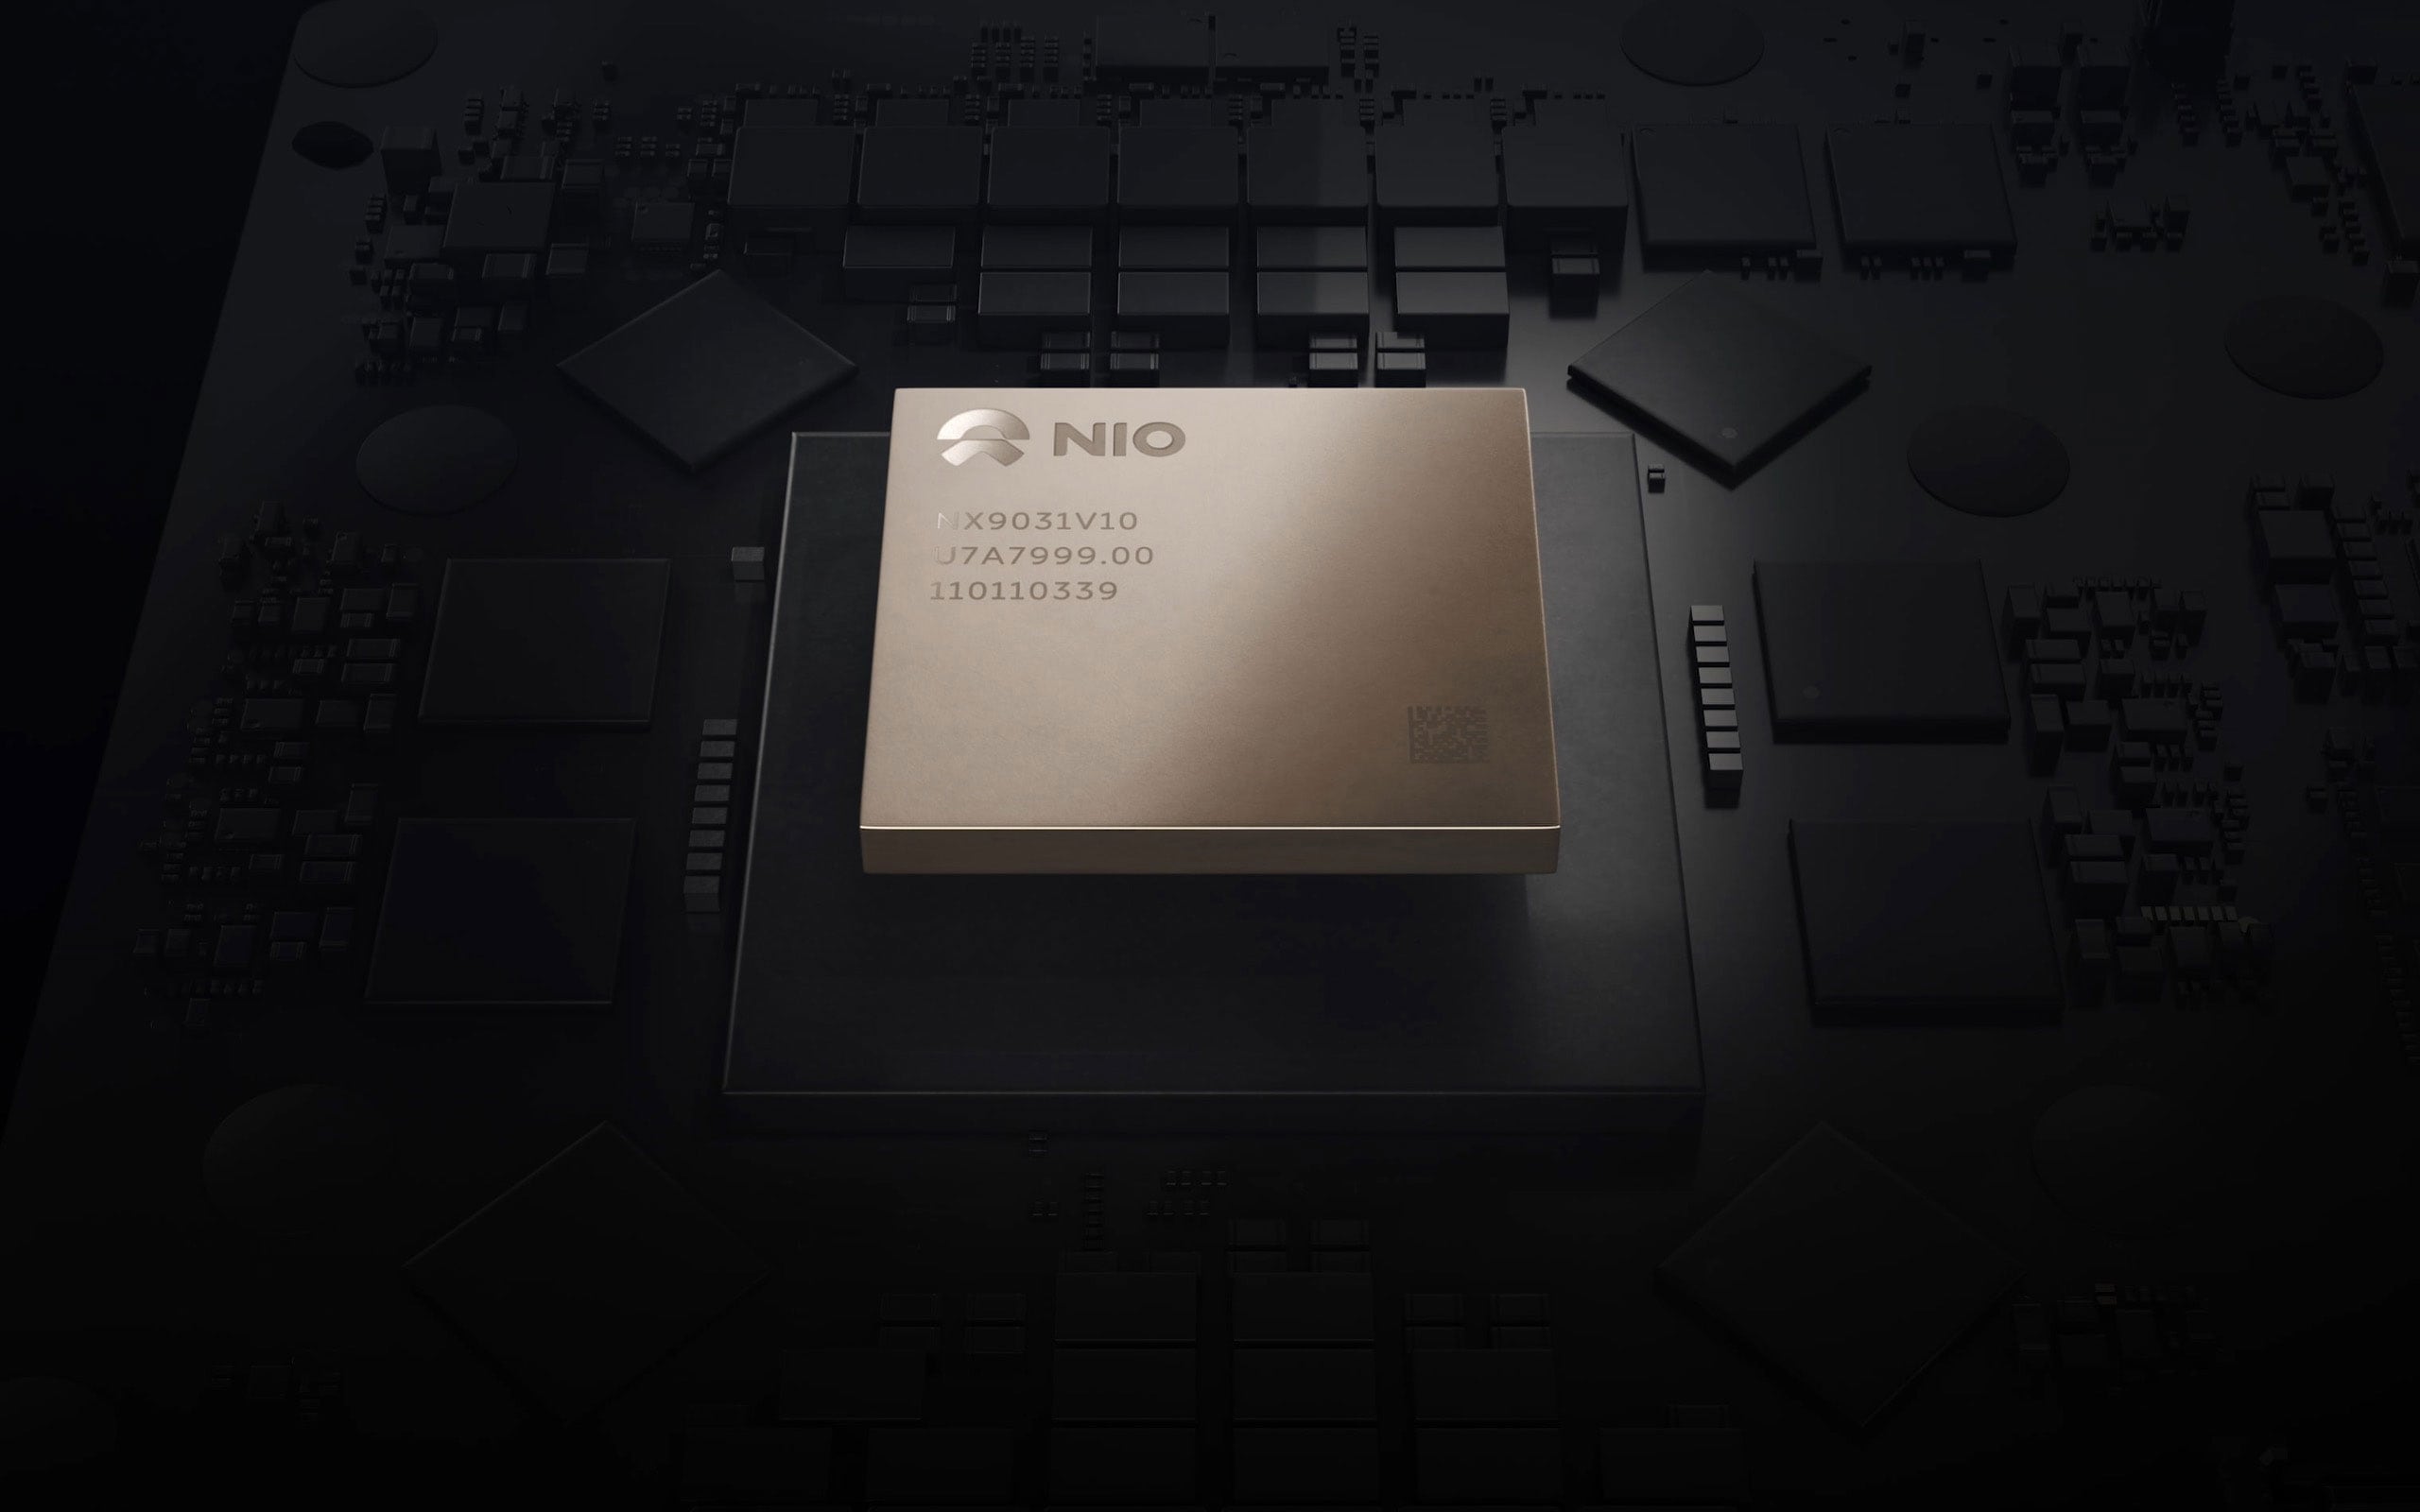 The world's first 5nm automotive-grade chip (N5A) for autonomous driving, with the innovative application of 32-core CPU architecture. The chip also features NIO's in-house developed high-performance ISP and heterogeneous multi-core NPU.